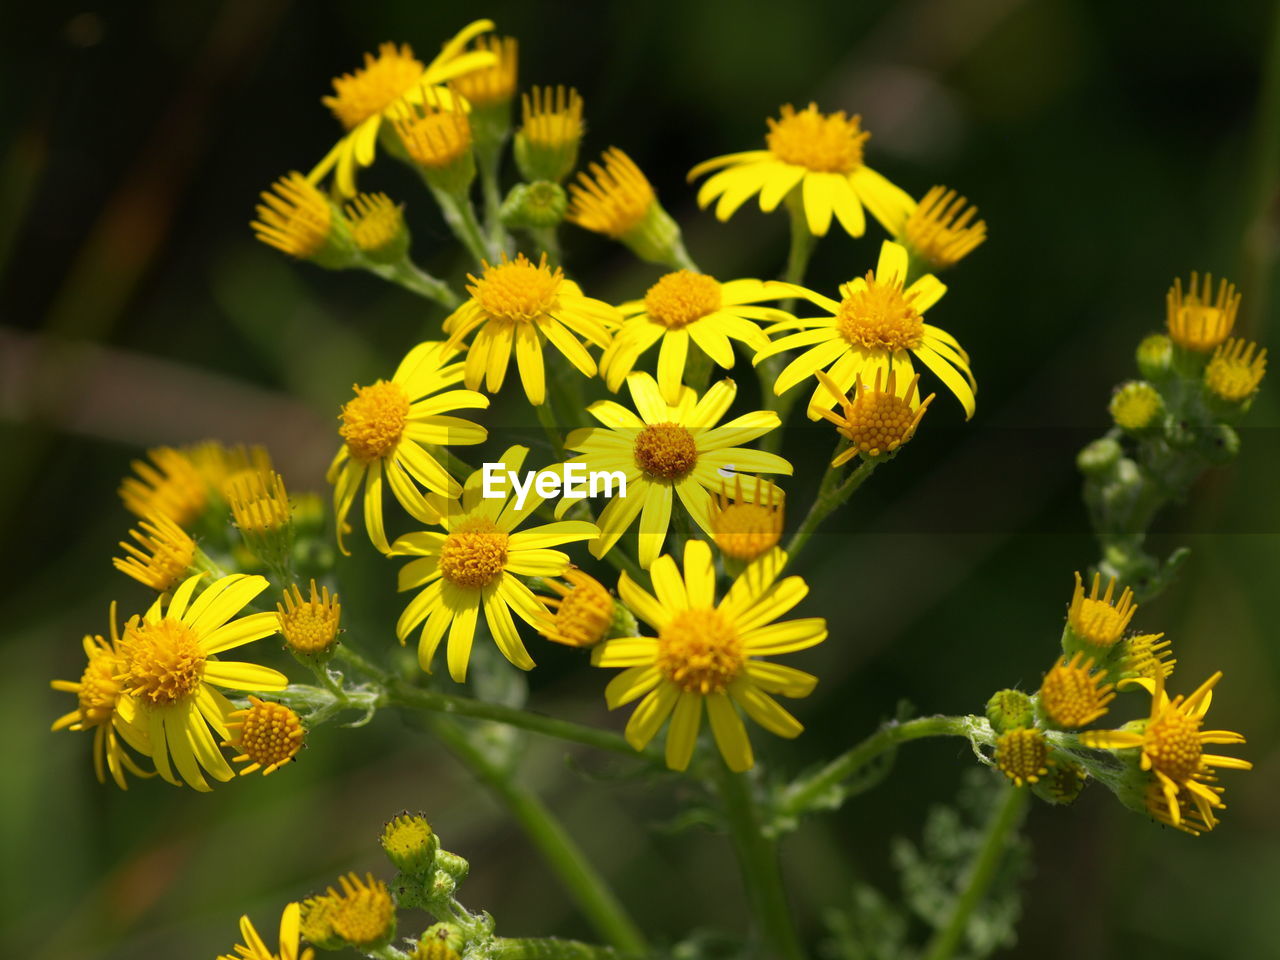 CLOSE-UP OF YELLOW FLOWERING PLANTS OUTDOORS